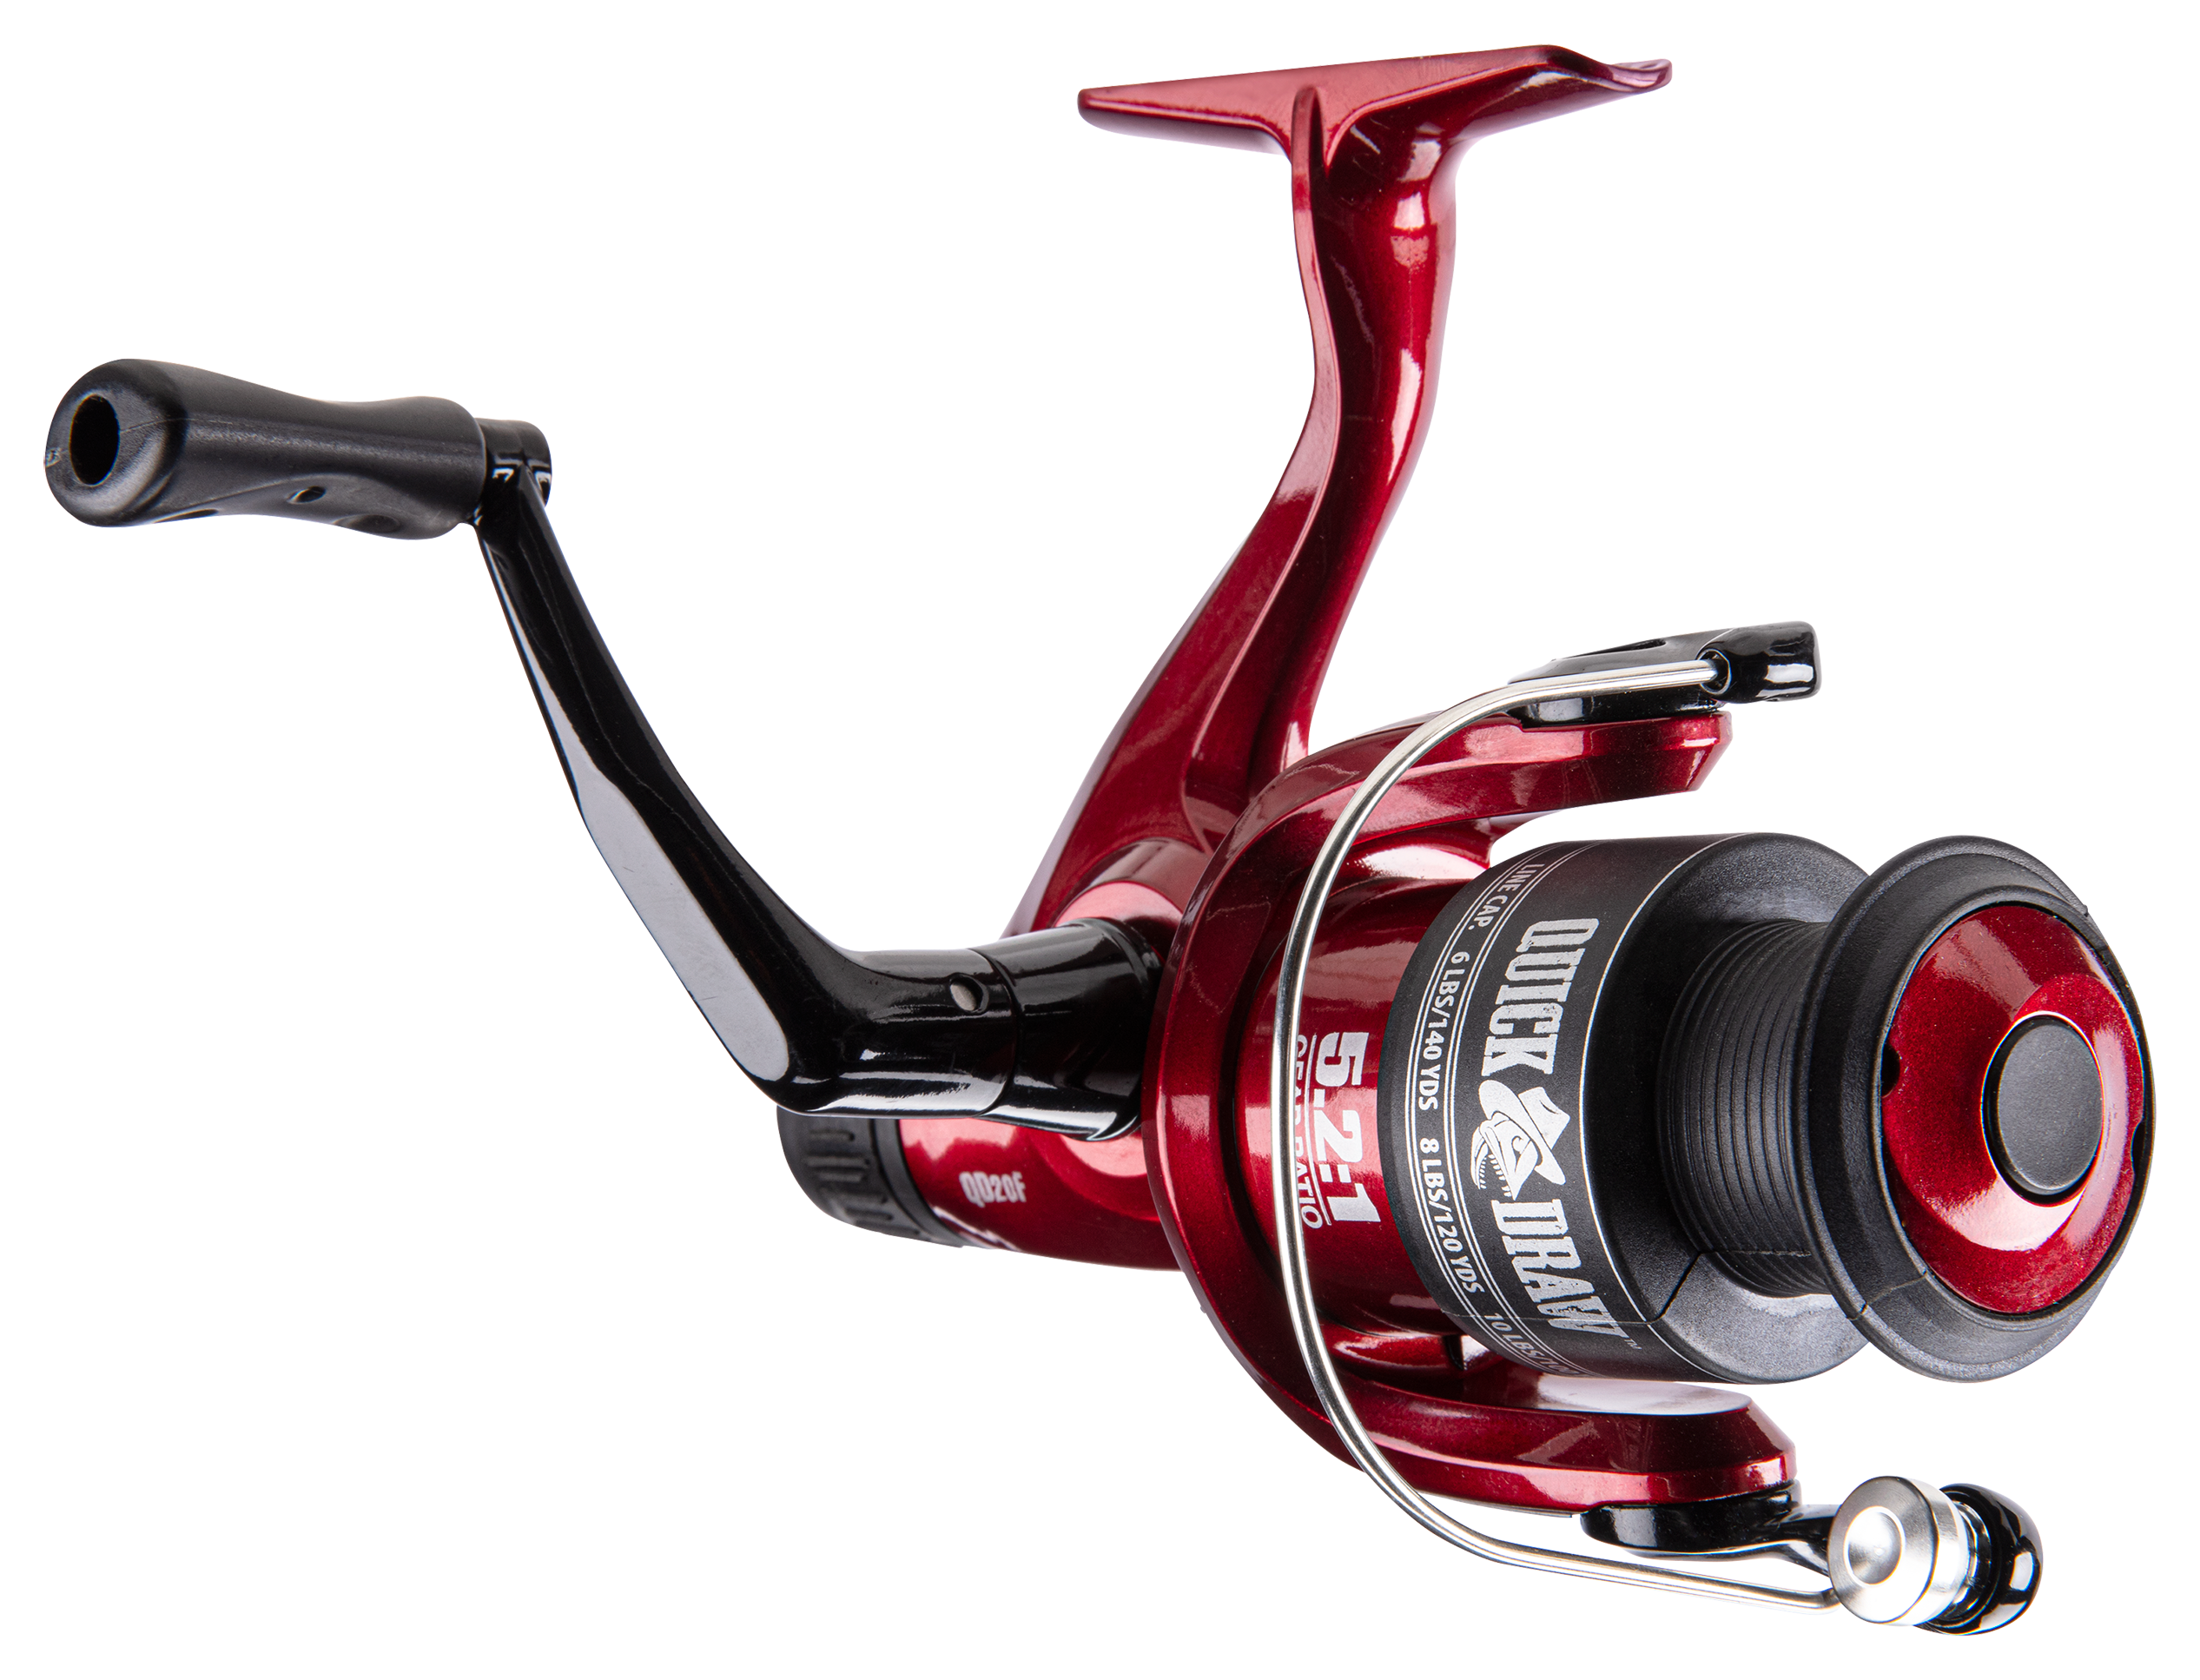 Browning Rear Drag Reels : 24Tackle, Fishing Tackle Online Store